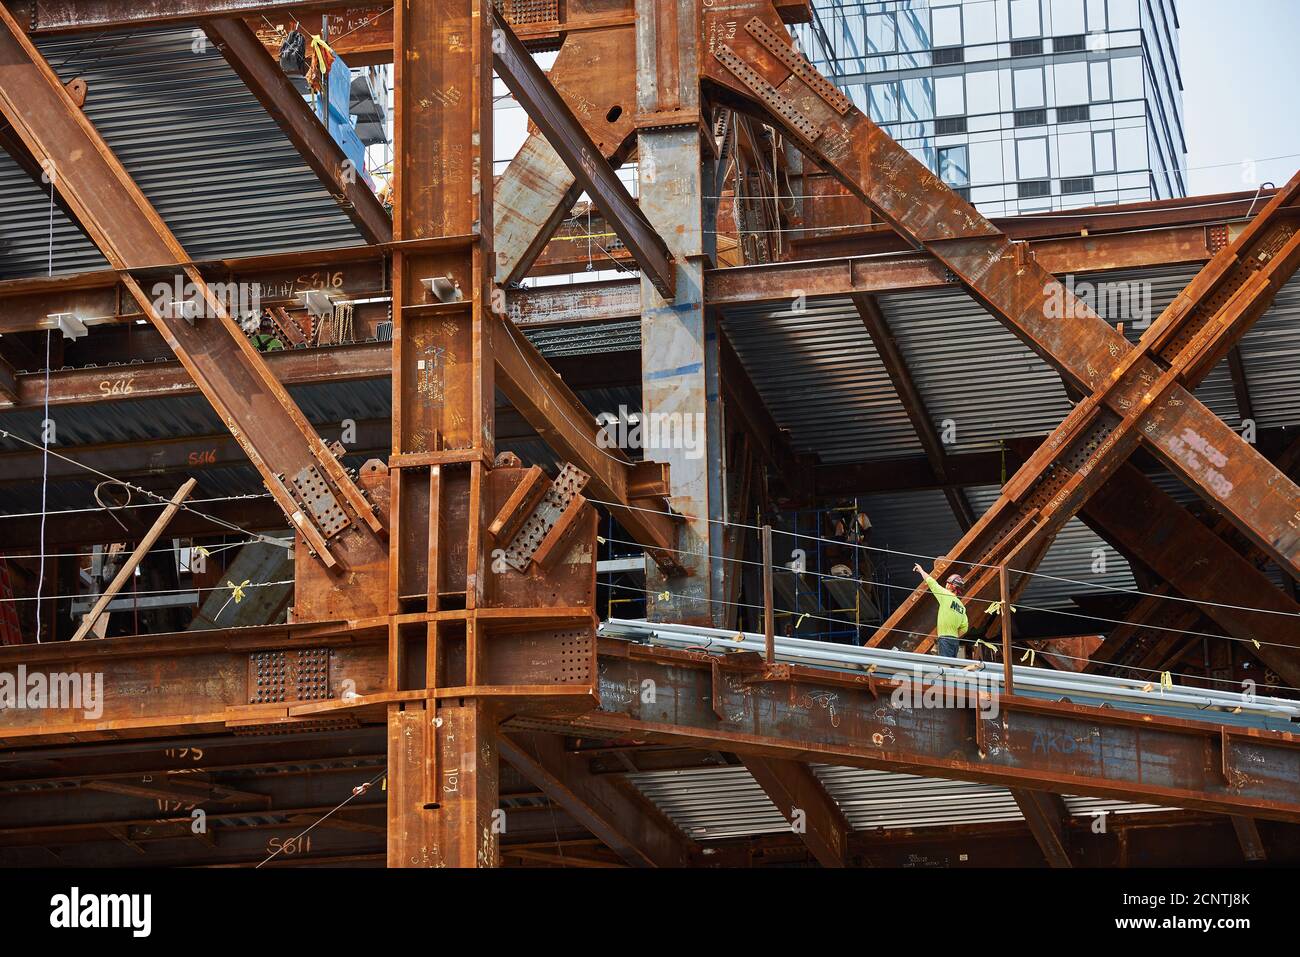 A detail of the construction of a large skyscraper in the Hudson Yards neighborhood of west midtown Manhattan. Stock Photo